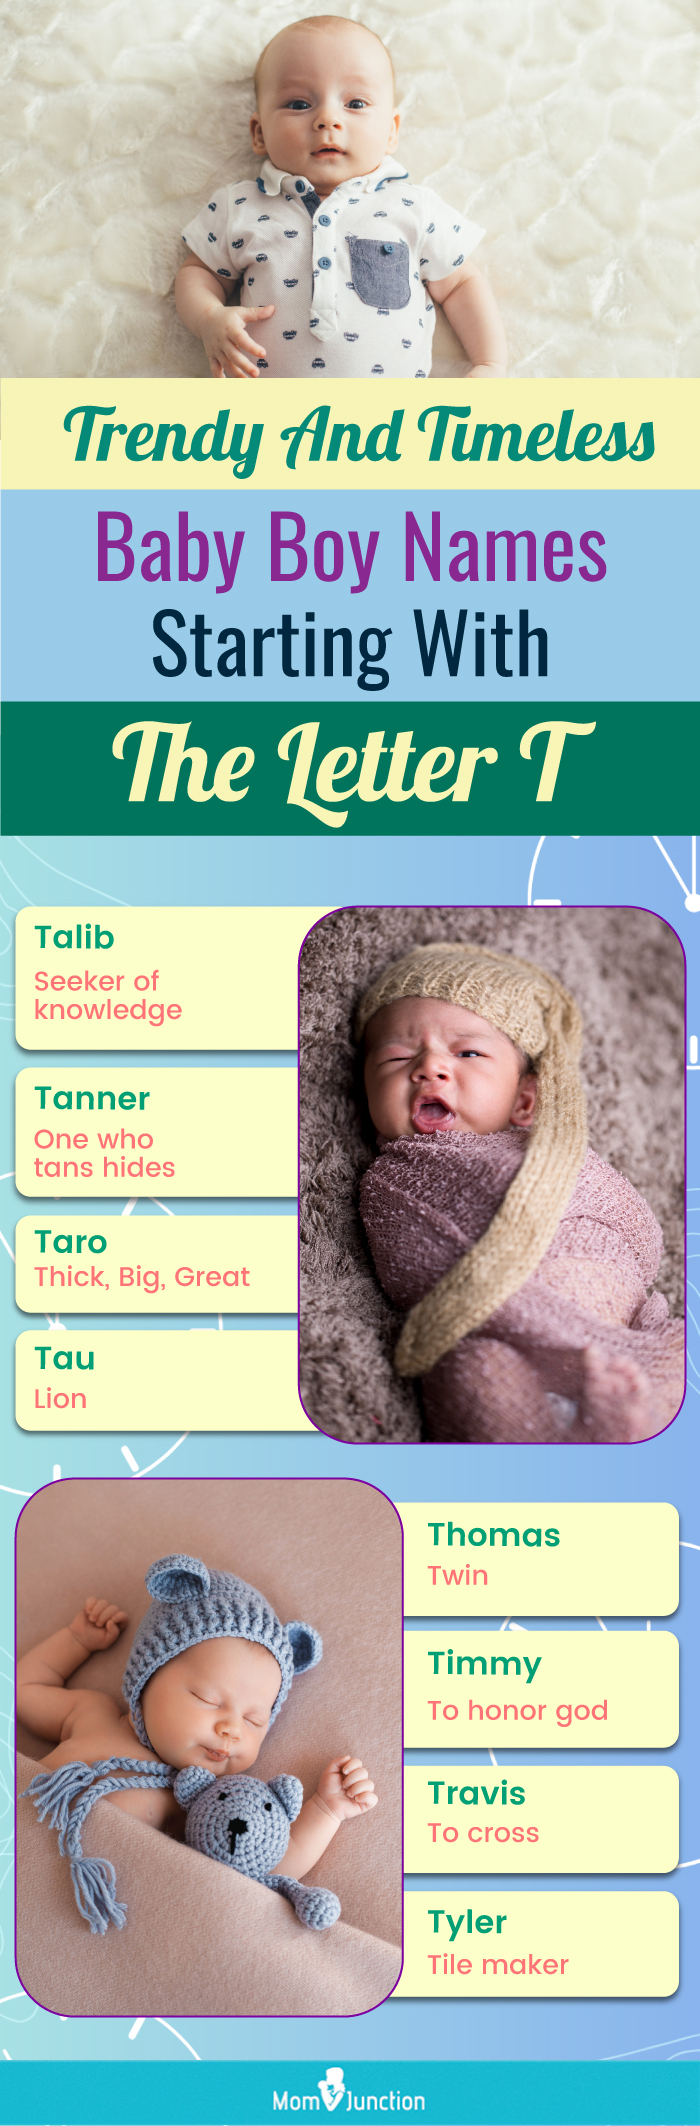 trendy and timeless baby boy names starting with the letter t (infographic)